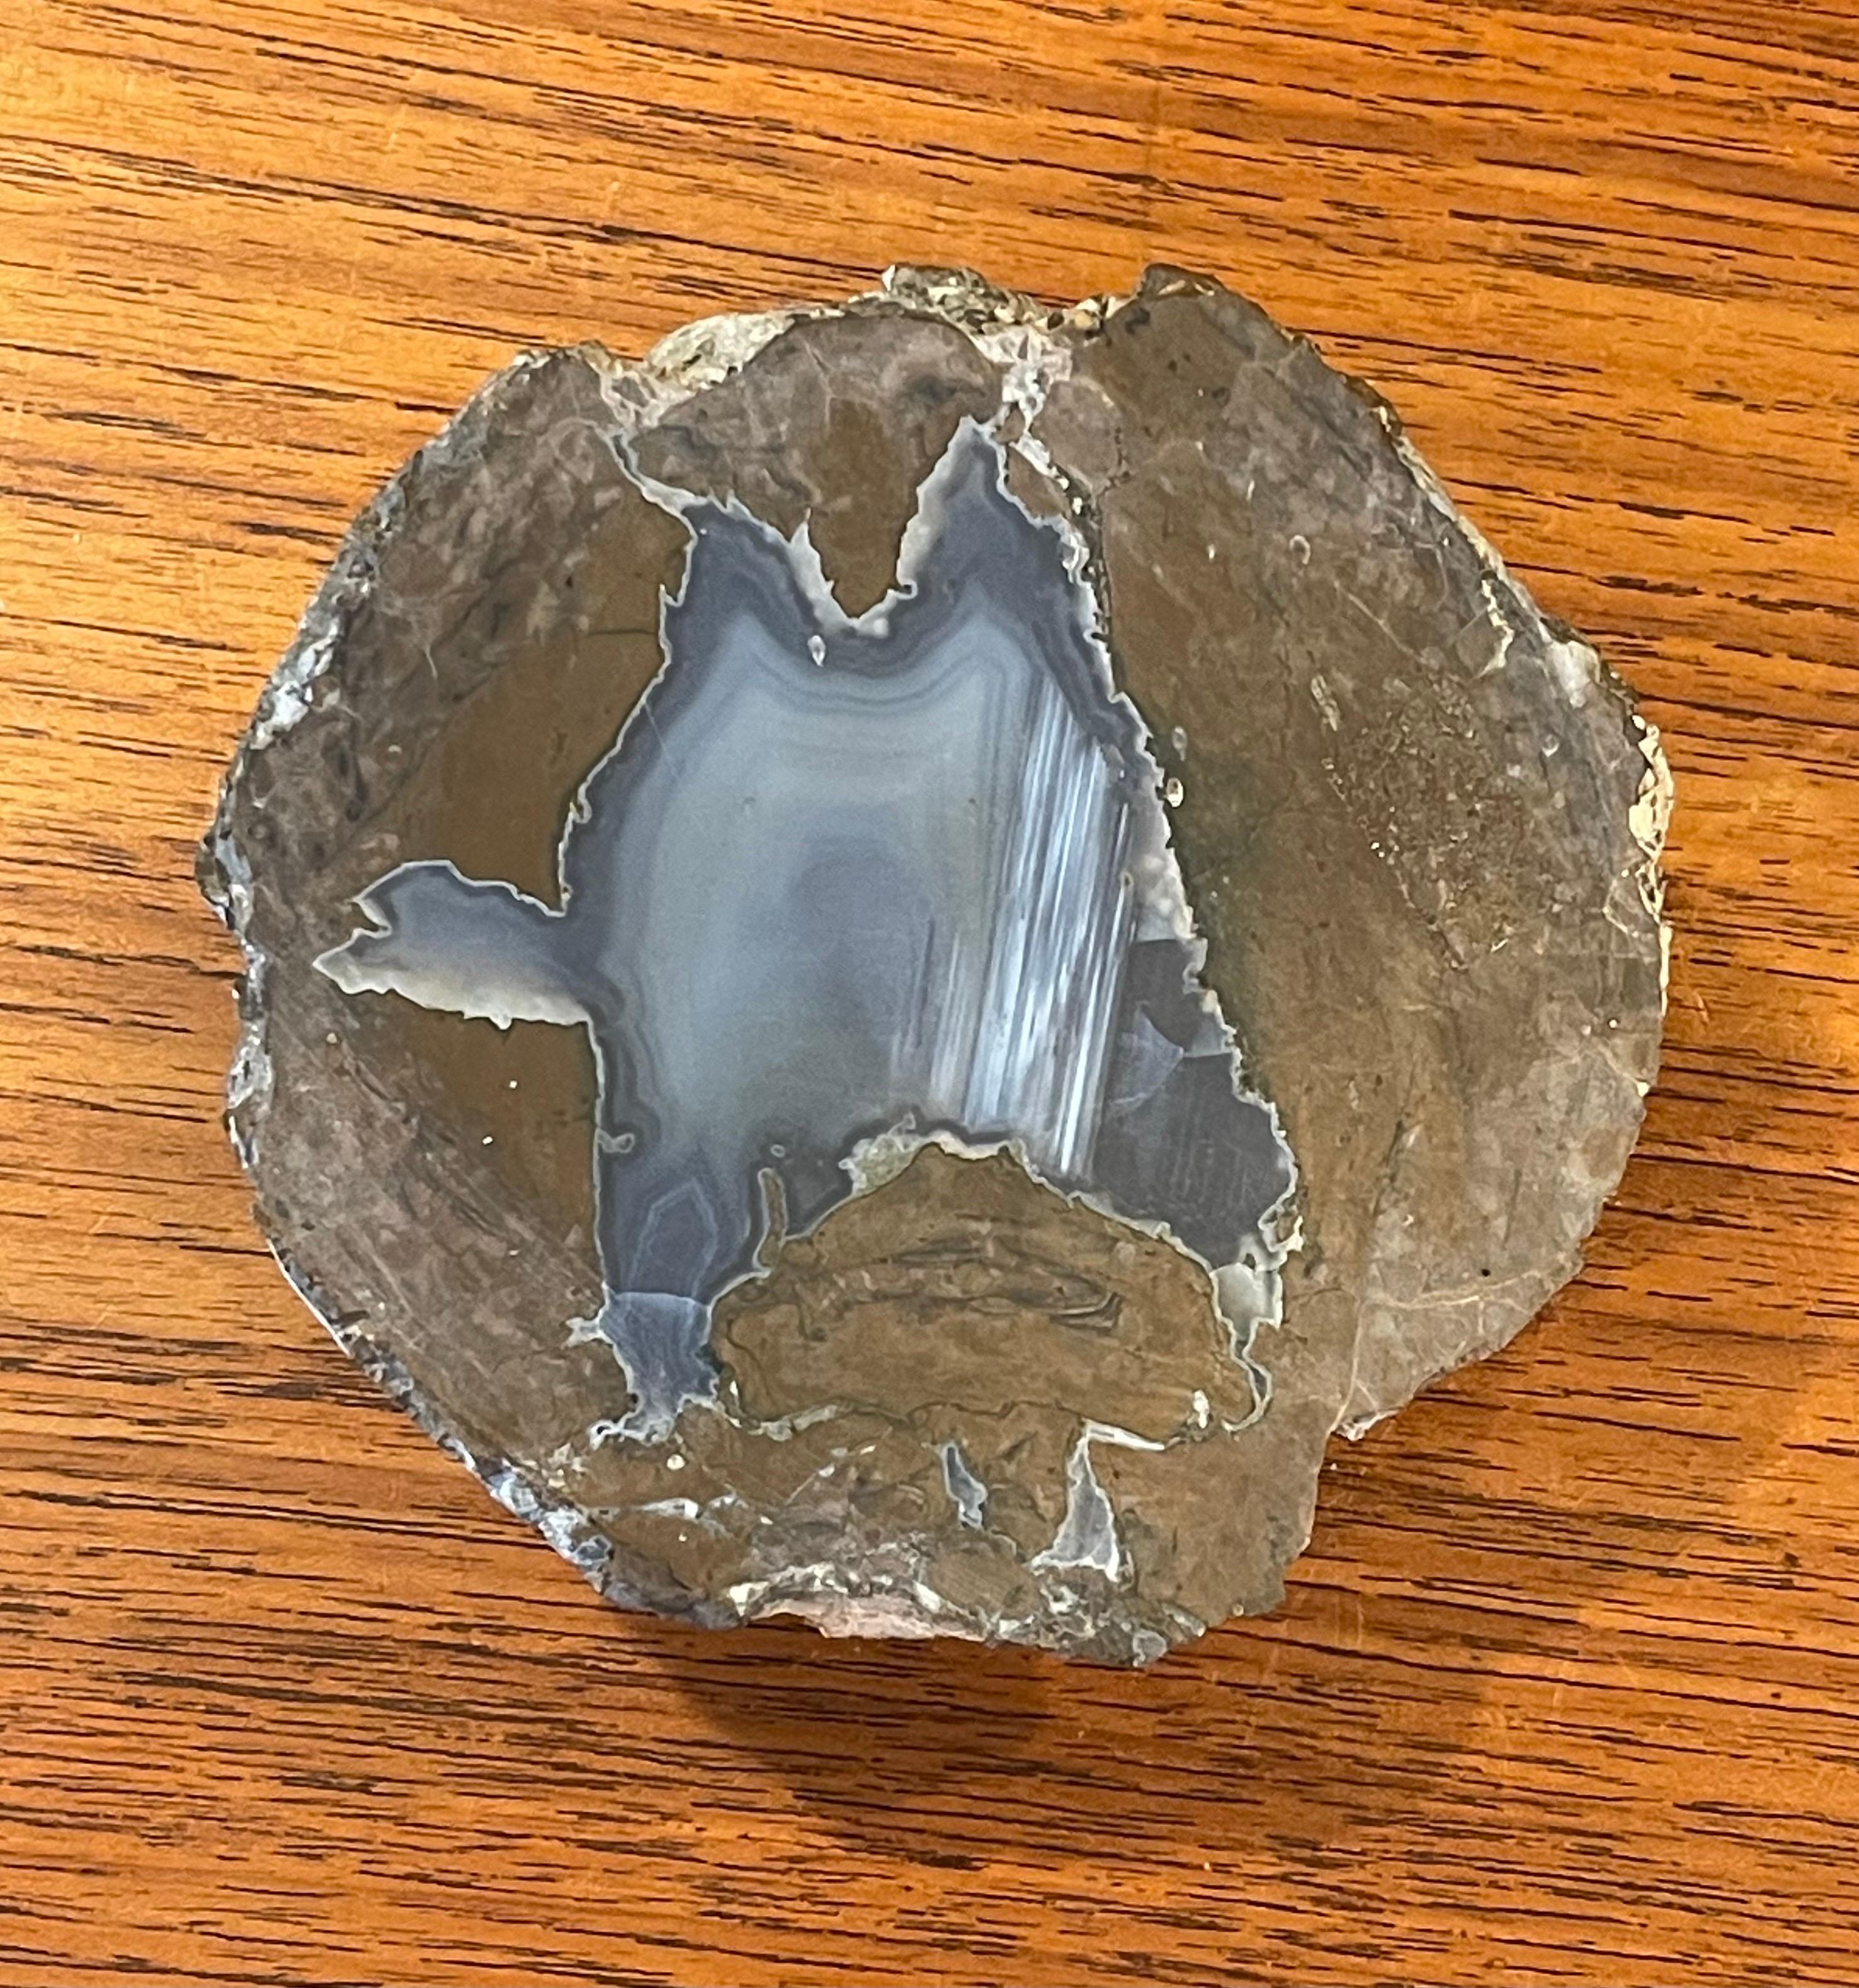 A very nice vintage cut geode paper weight, circa 1960s. The piece is in very good condition with wonderful brown, tan, grey and blue colors and measures 4.25